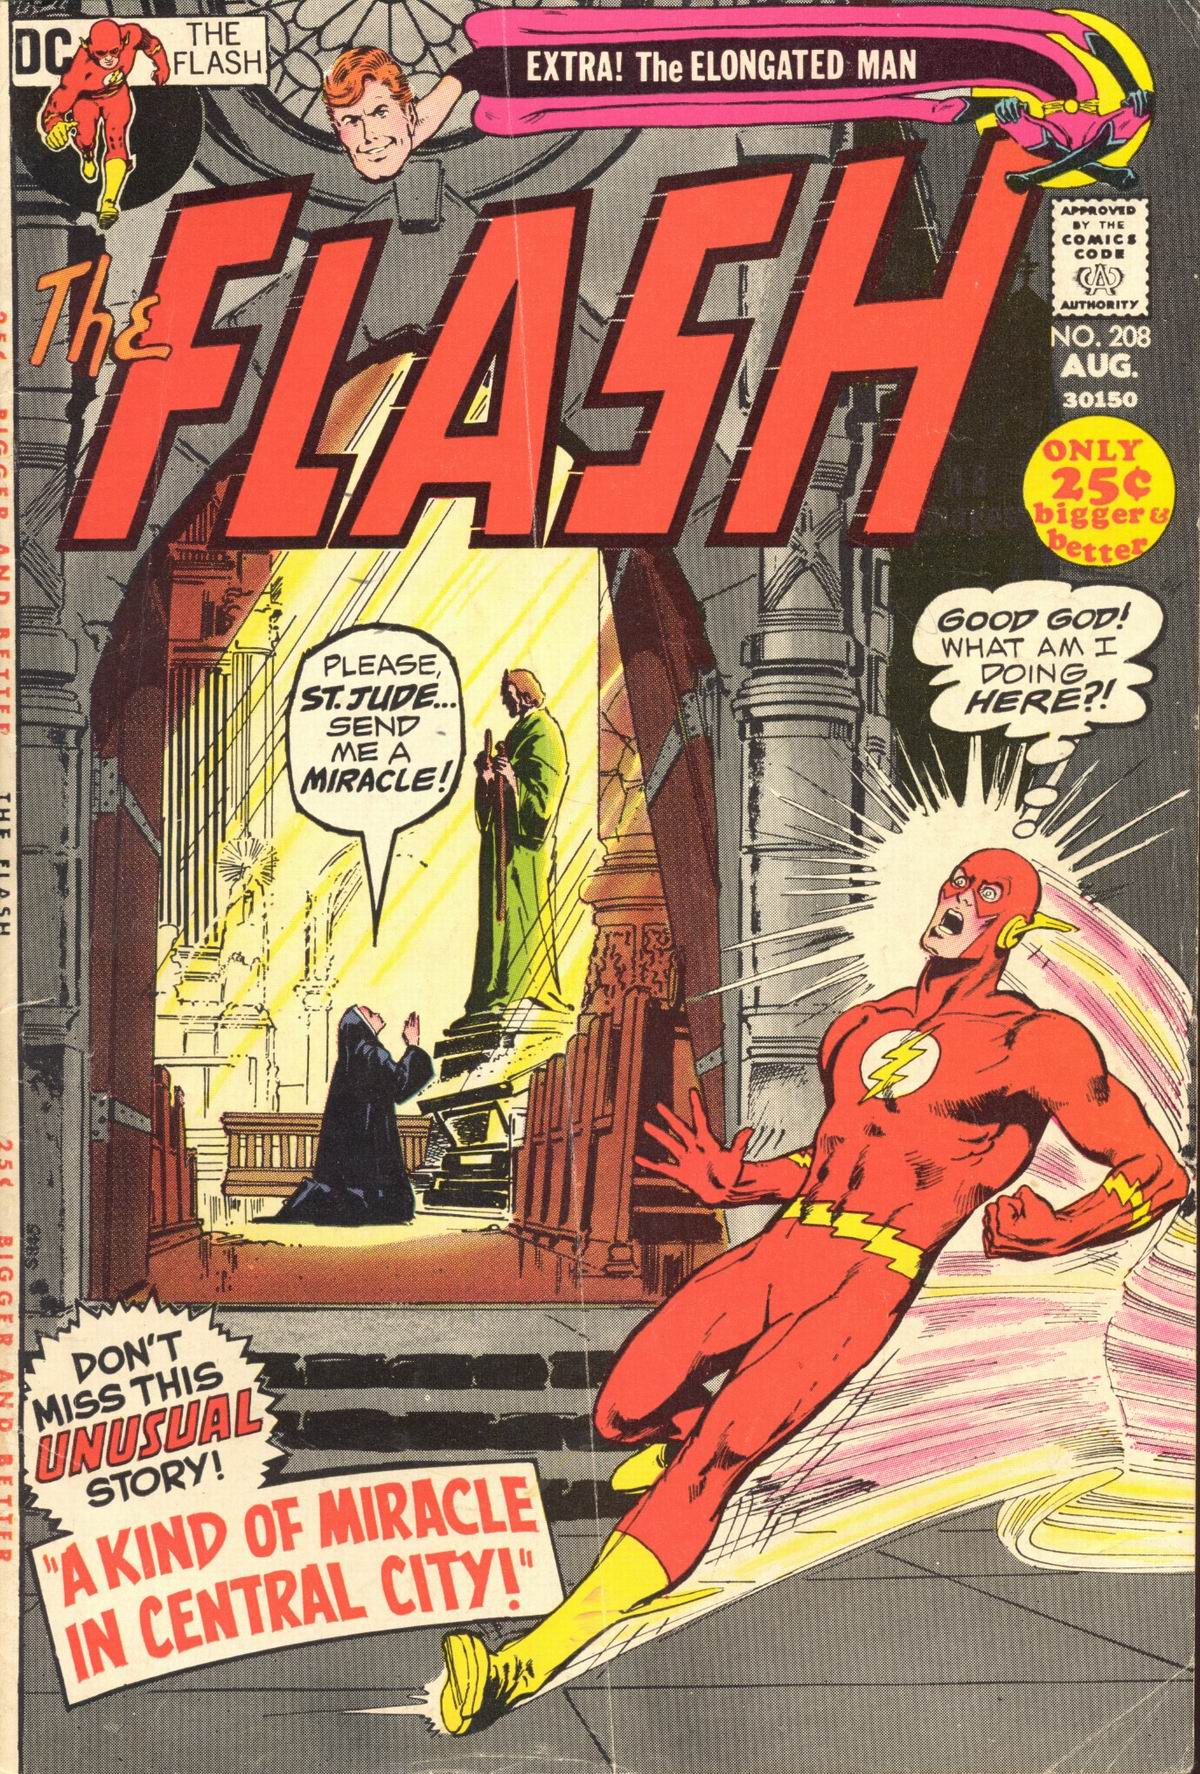 The Flash (1959) 208 Page 1